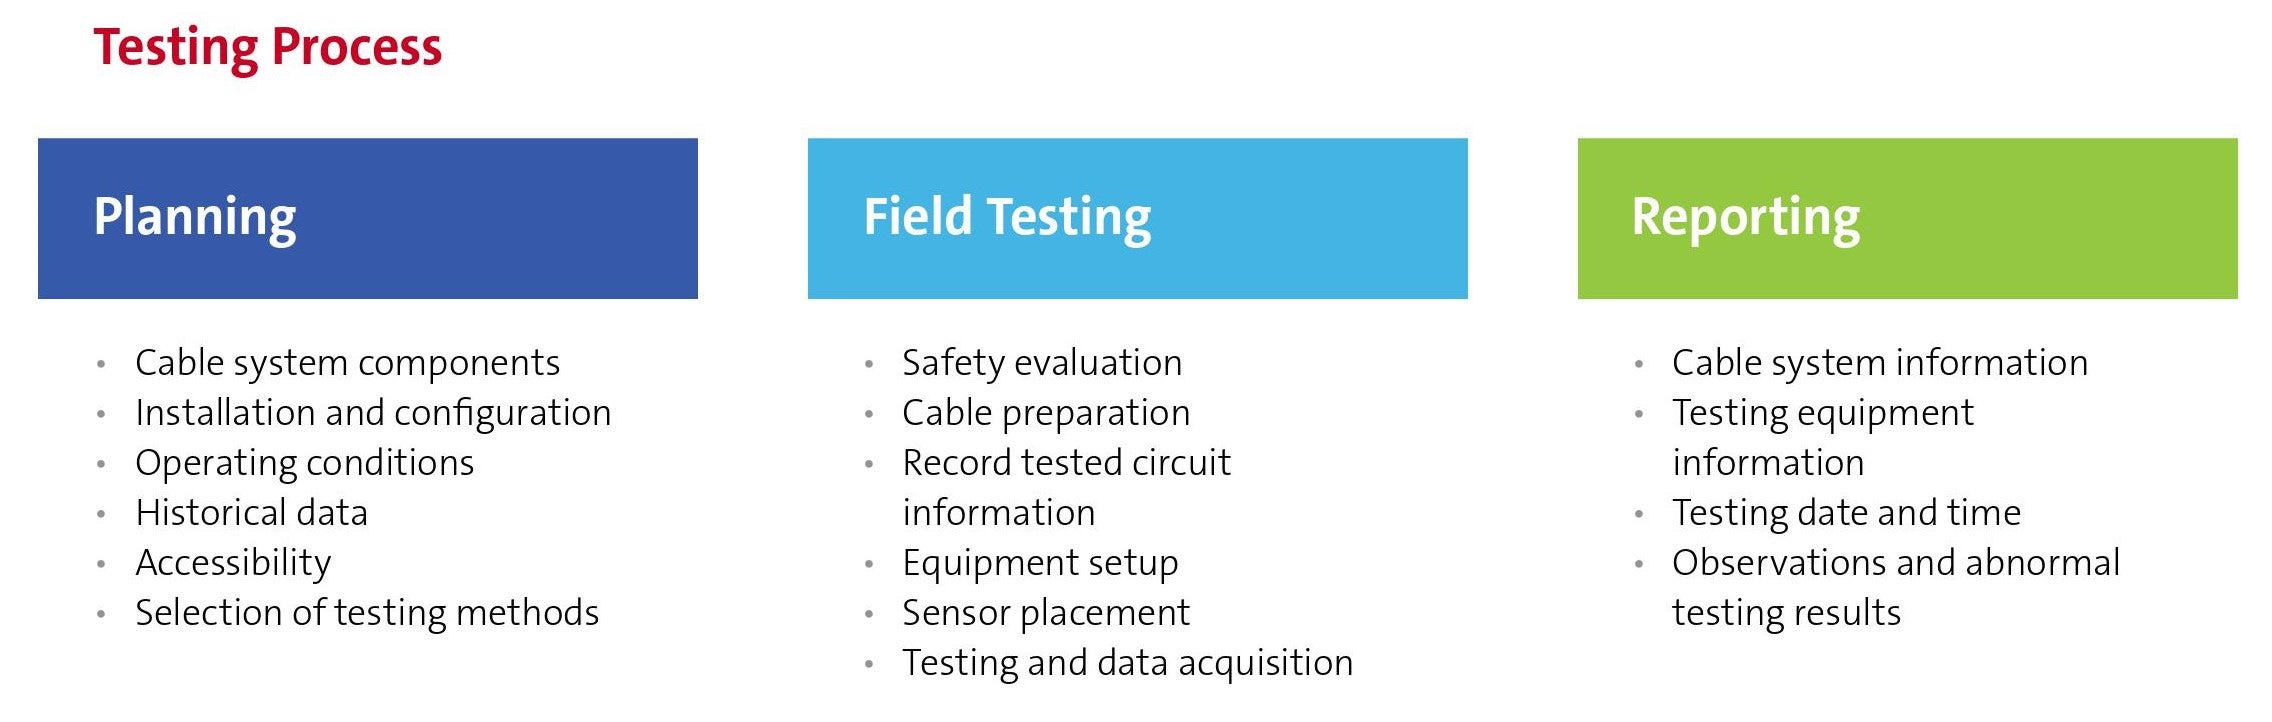 Testing process table